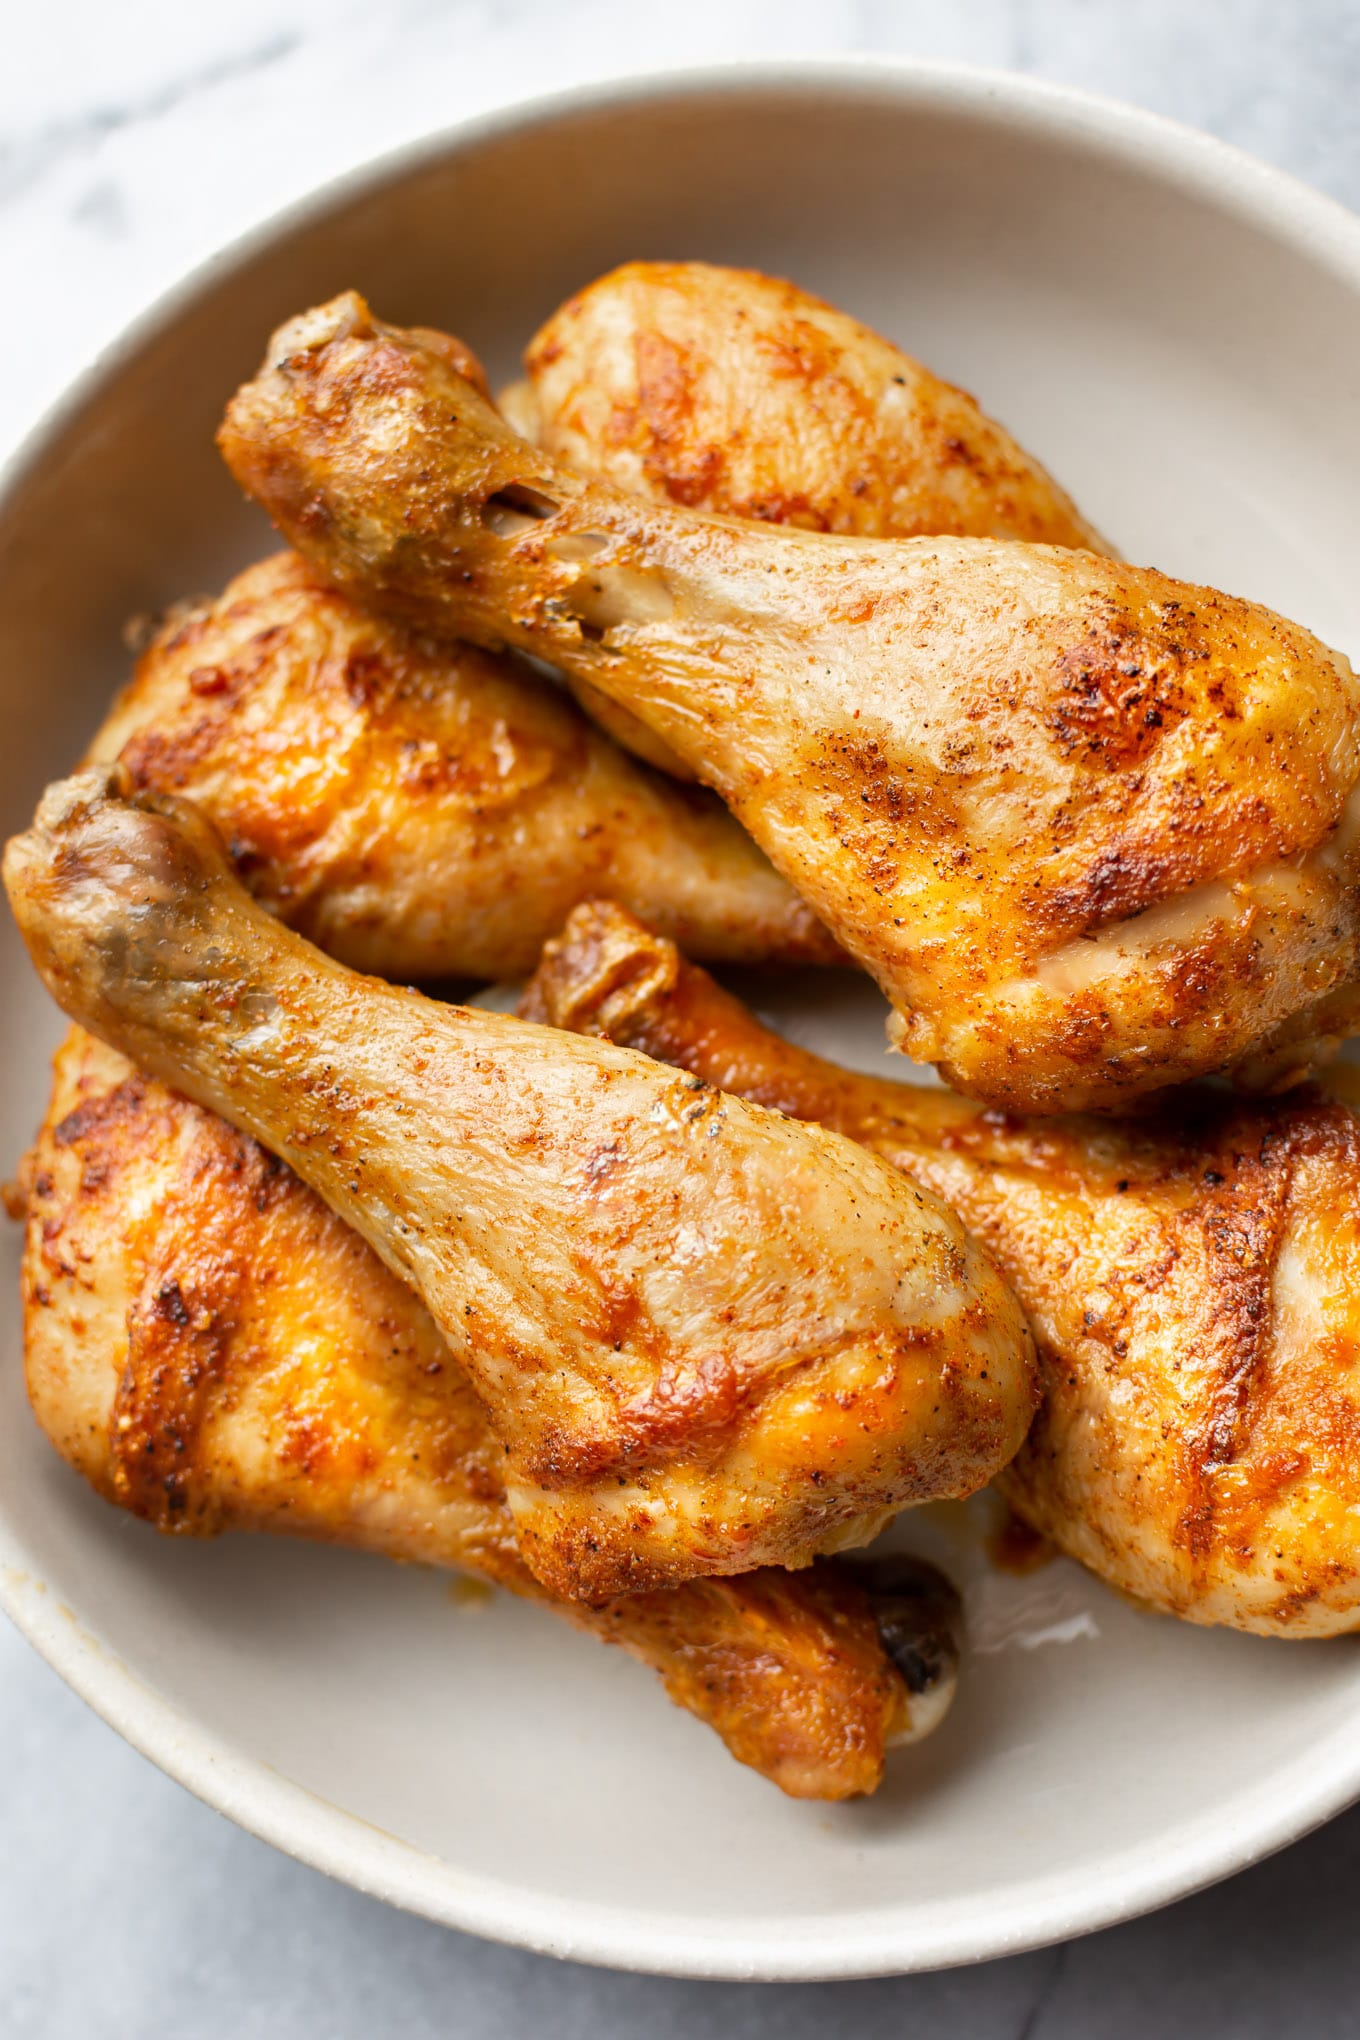 How to Cook Chicken: 11 Easy Ways